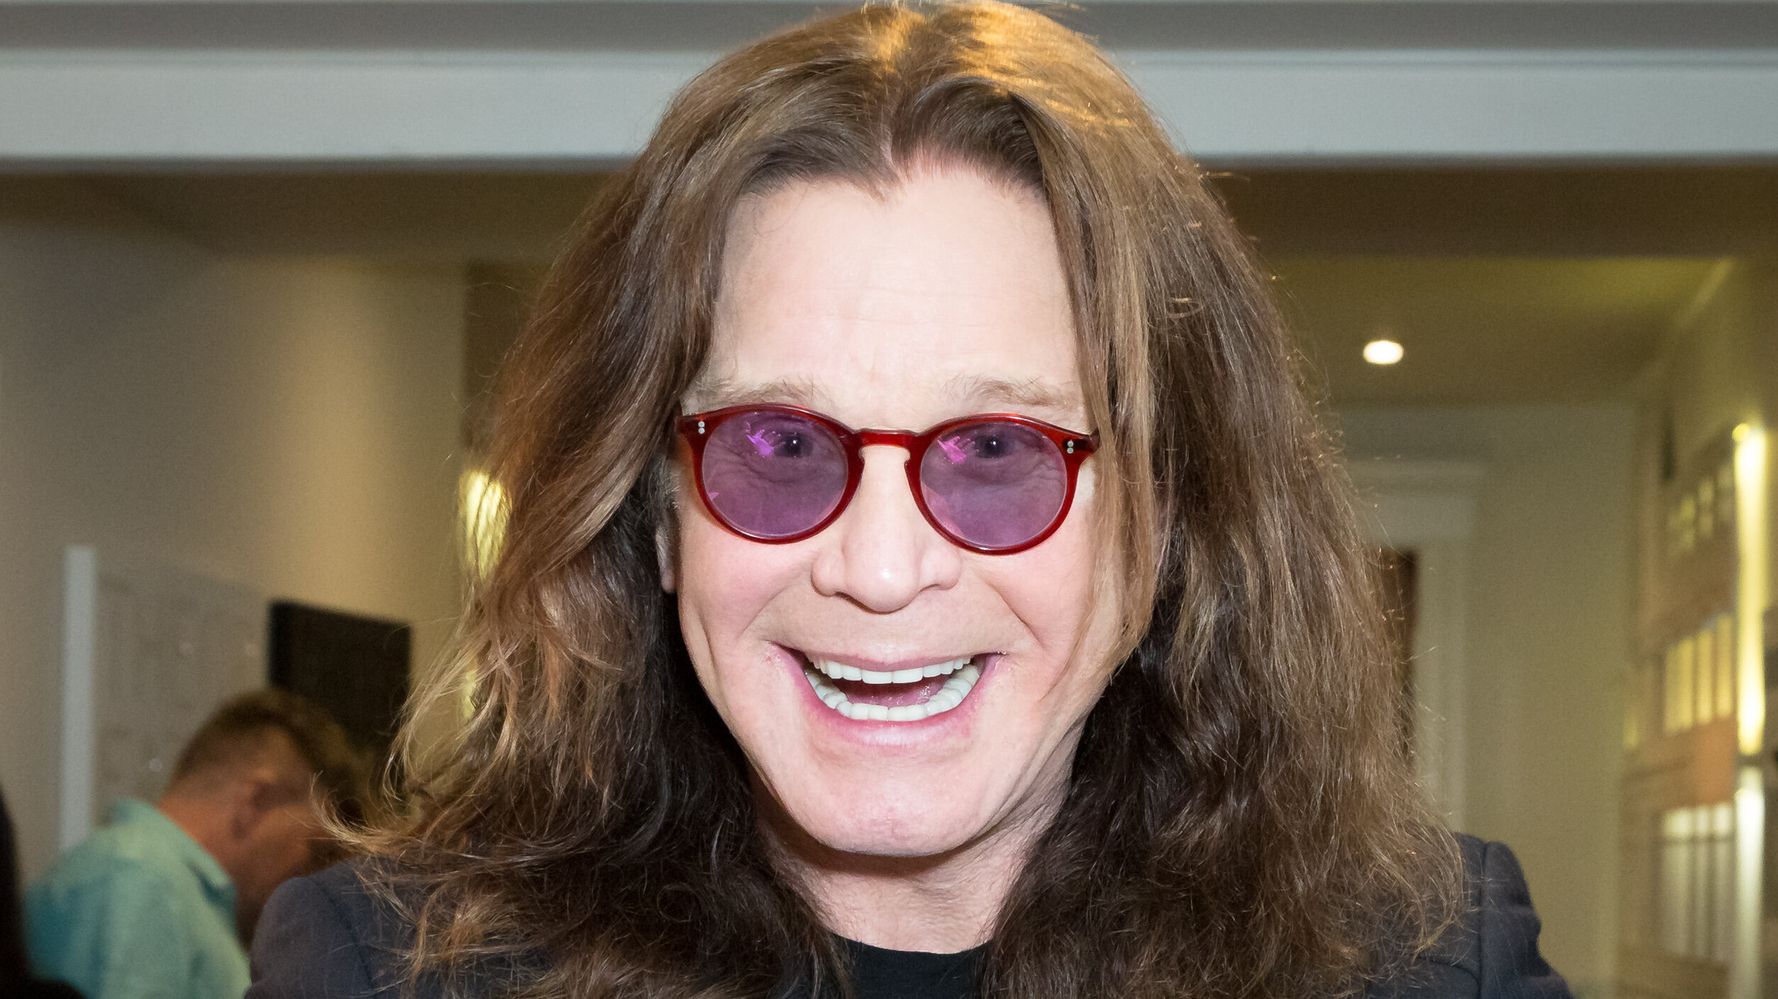 Paging Dr. Satan: Ozzy Osbourne Jokingly Credits Devil For COVID-19 Protection